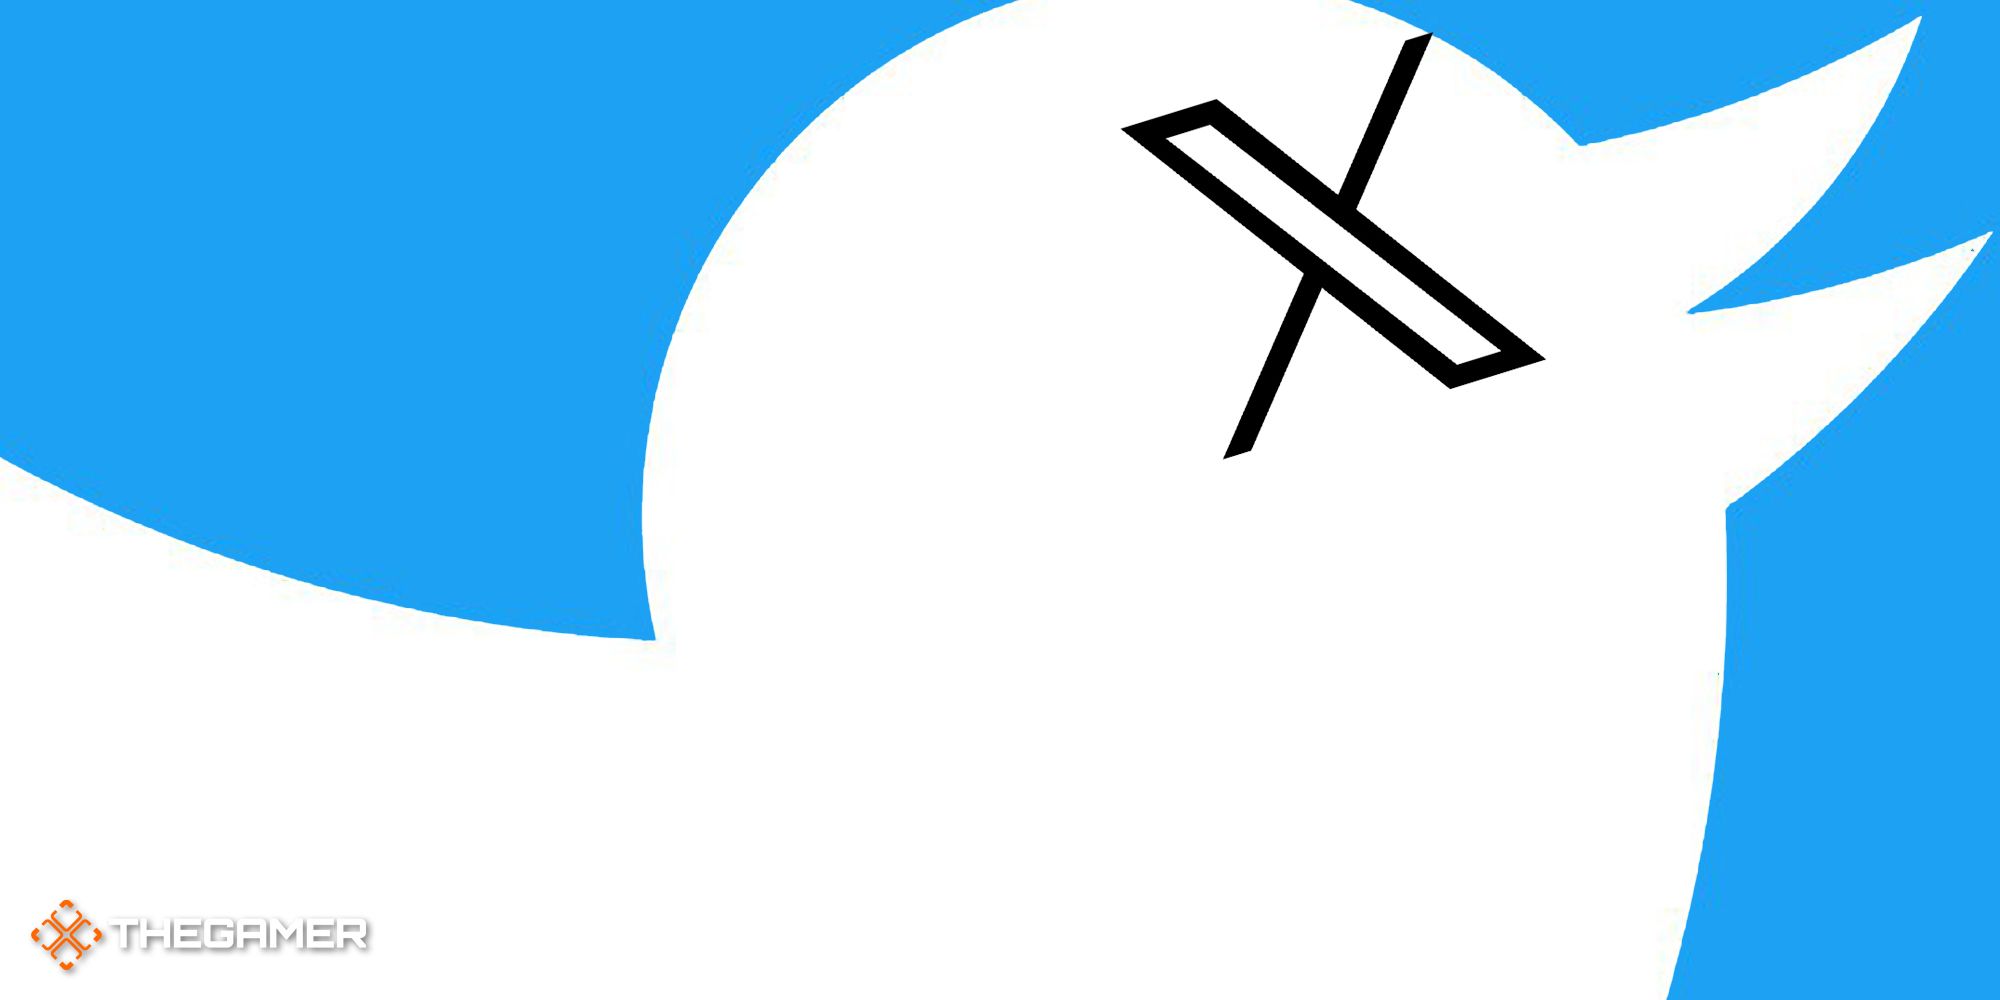 The Twitter bird with the X logo for an eye